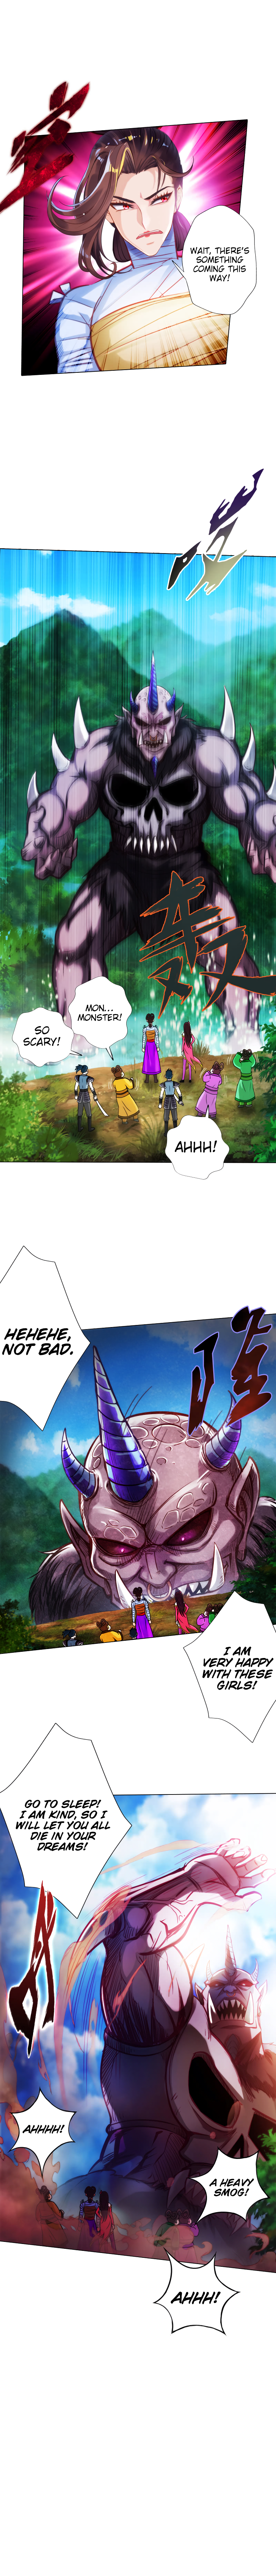 Lang Huan Library Chapter 36 page 3